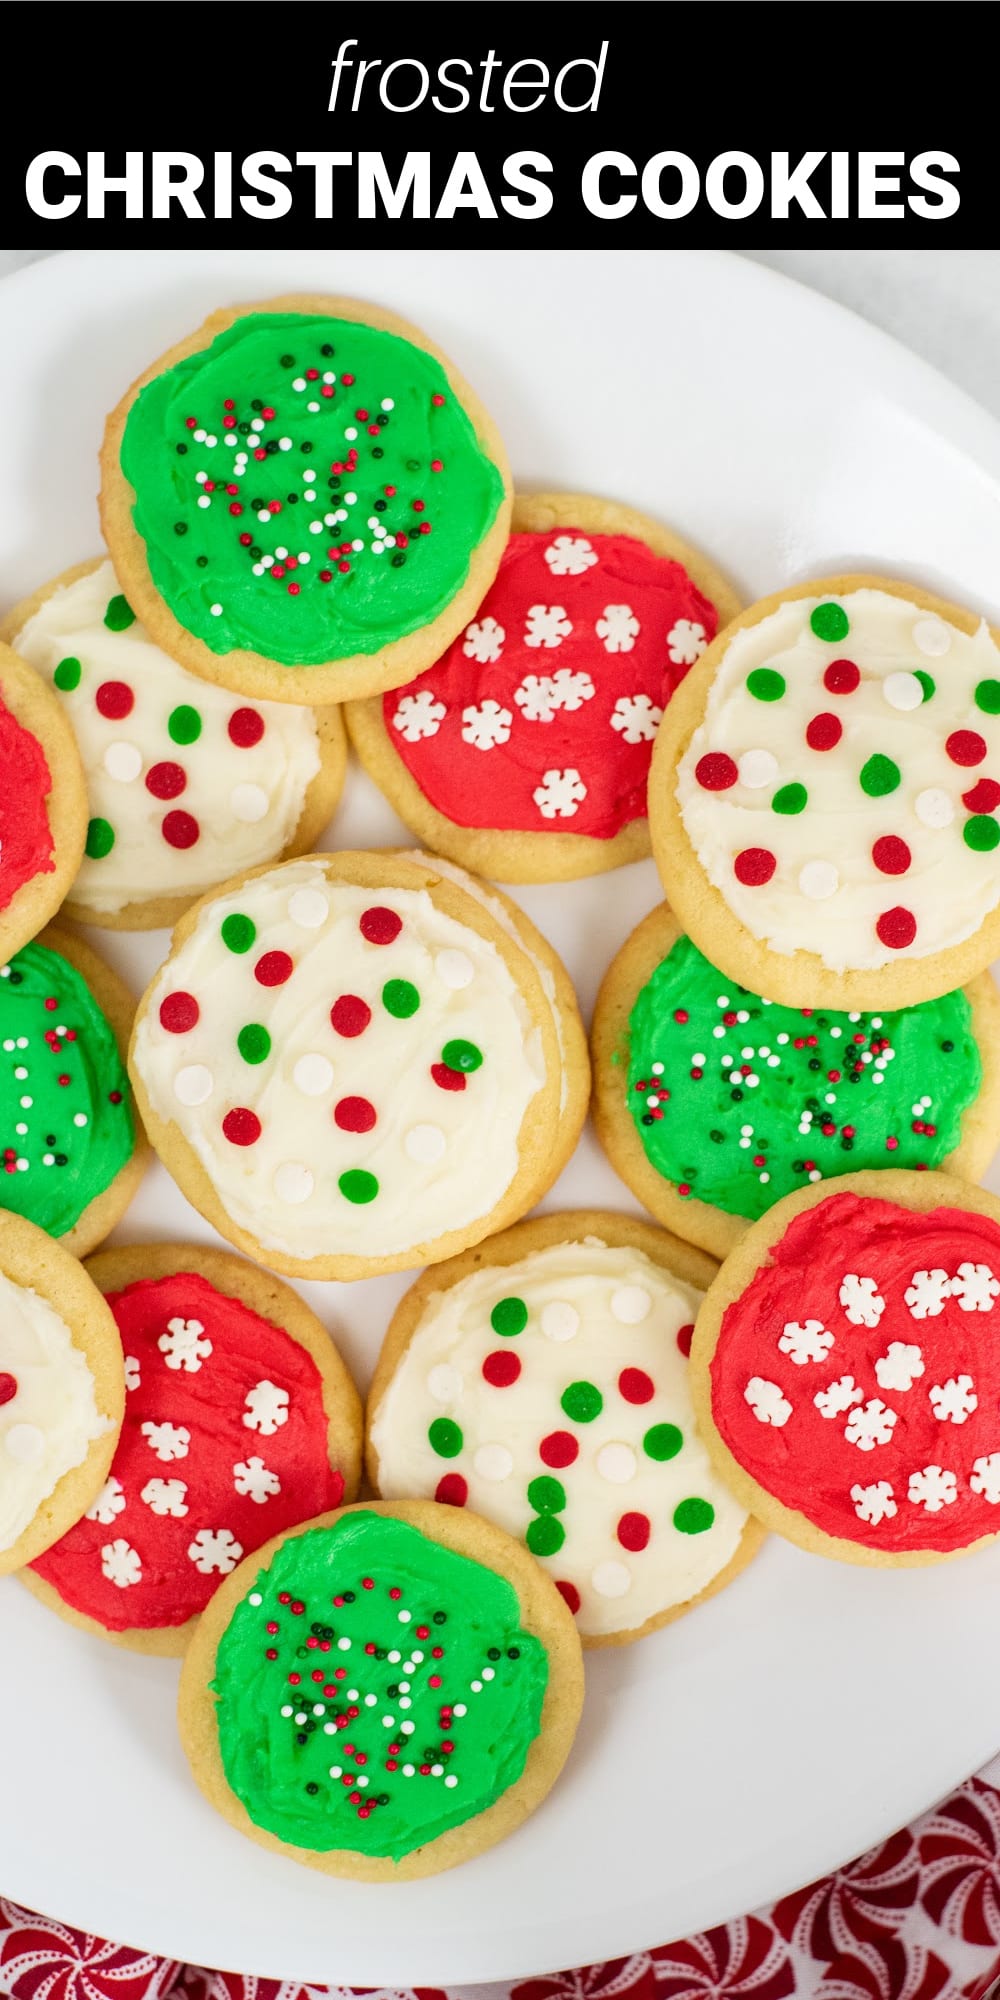 Made with all simple ingredients, these Frosted Christmas Cookies make the perfect sweet treat to add to your holiday baking lineup. You’re going to love these pillowy soft cookies because not only are delicious, but they are also super festive and 100% homemade! 